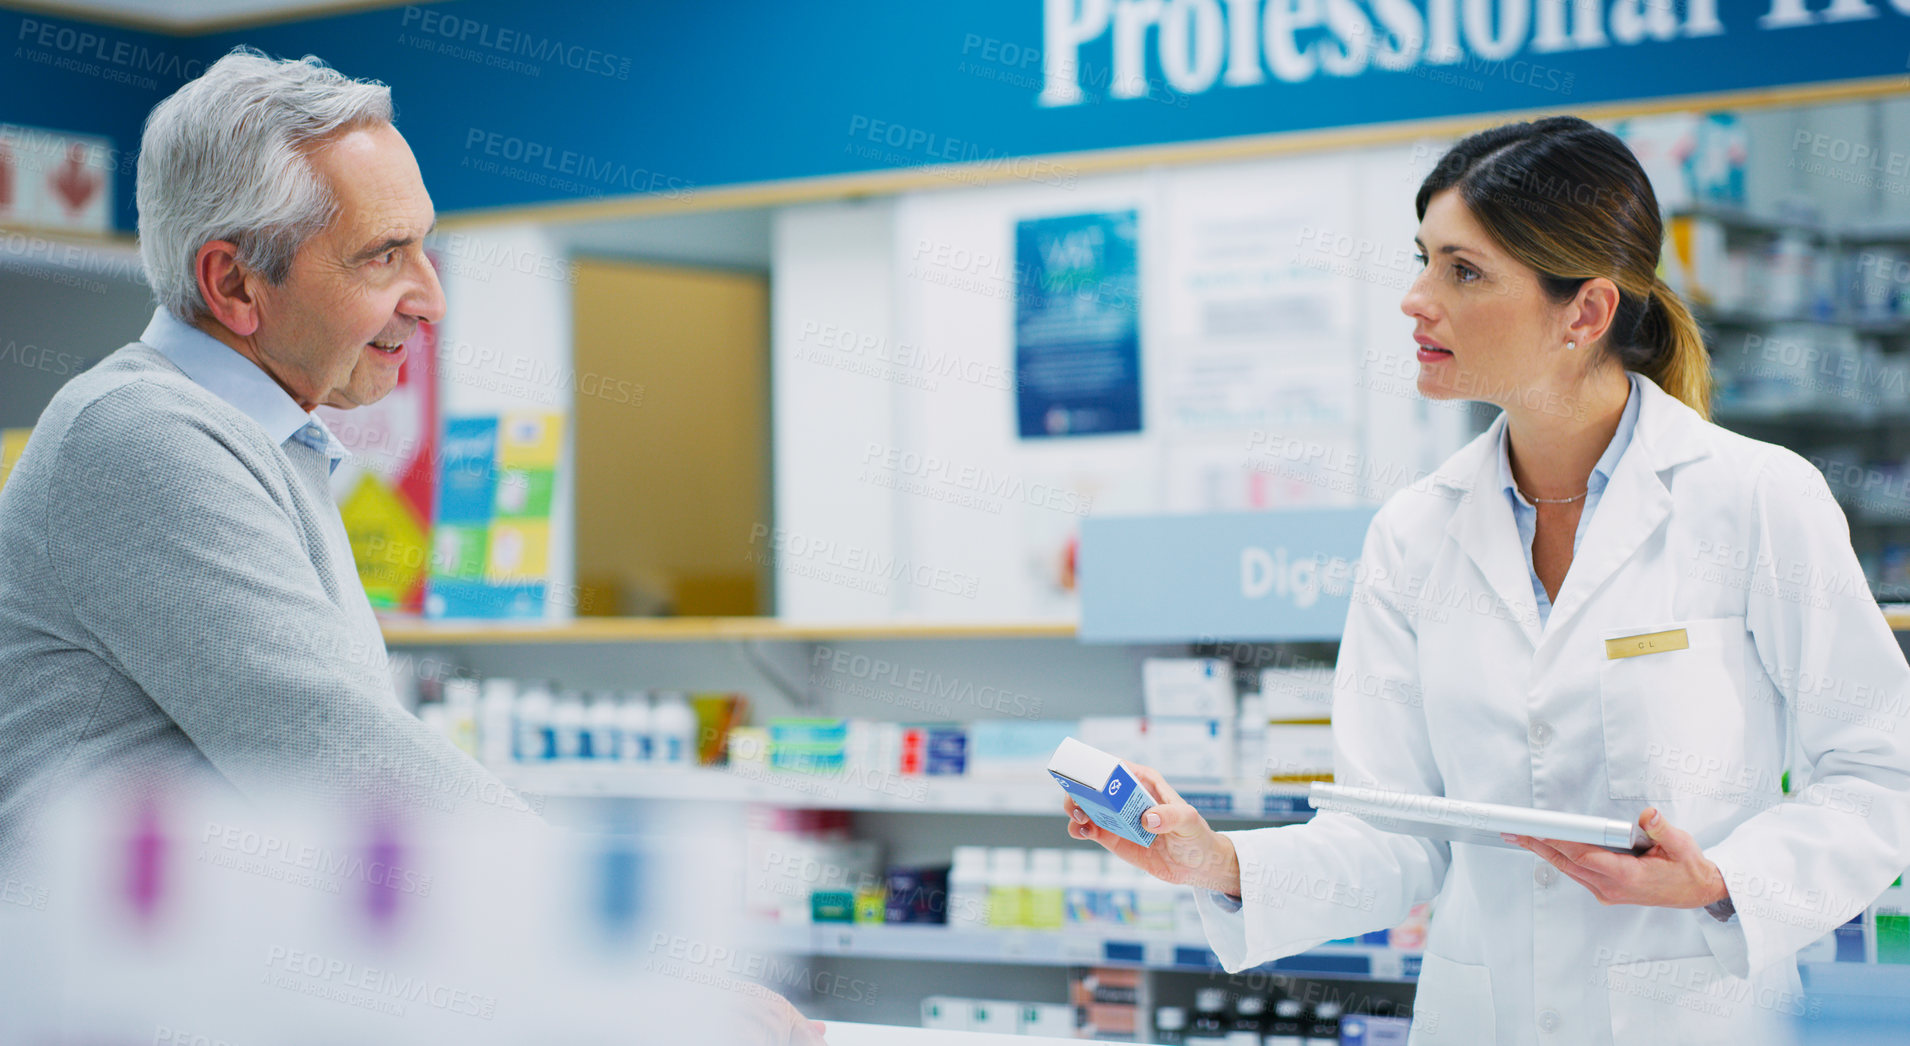 Buy stock photo Pharmacy product, elderly customer and woman helping patient, client or person with pharmaceutical, pills or package. Medicine, advice and female chemist talking, service and help with prescription